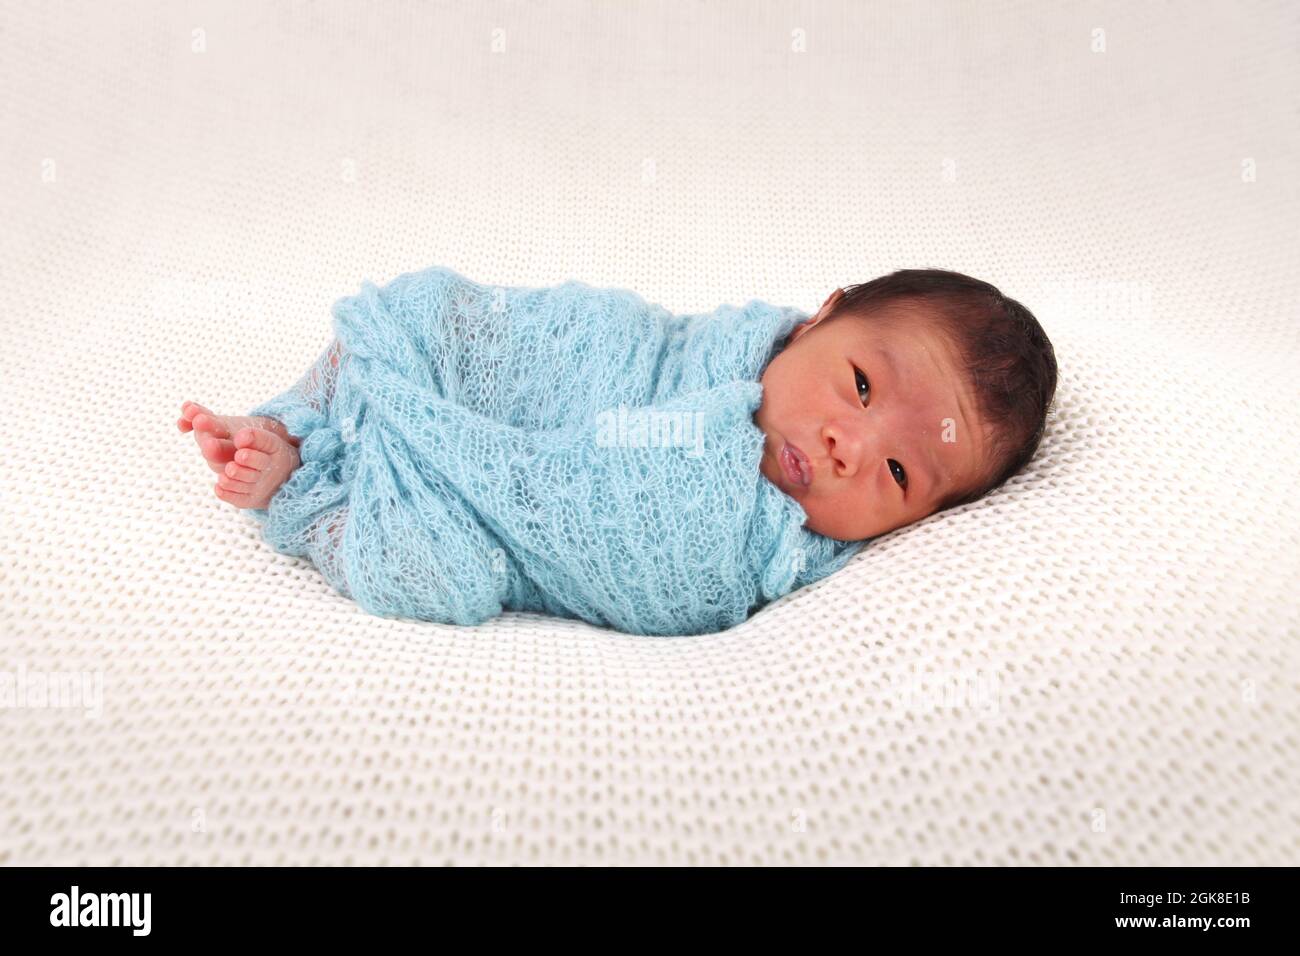 child with parents of Philippines ethnicity baby born in the UK, new born baby boy Stock Photo